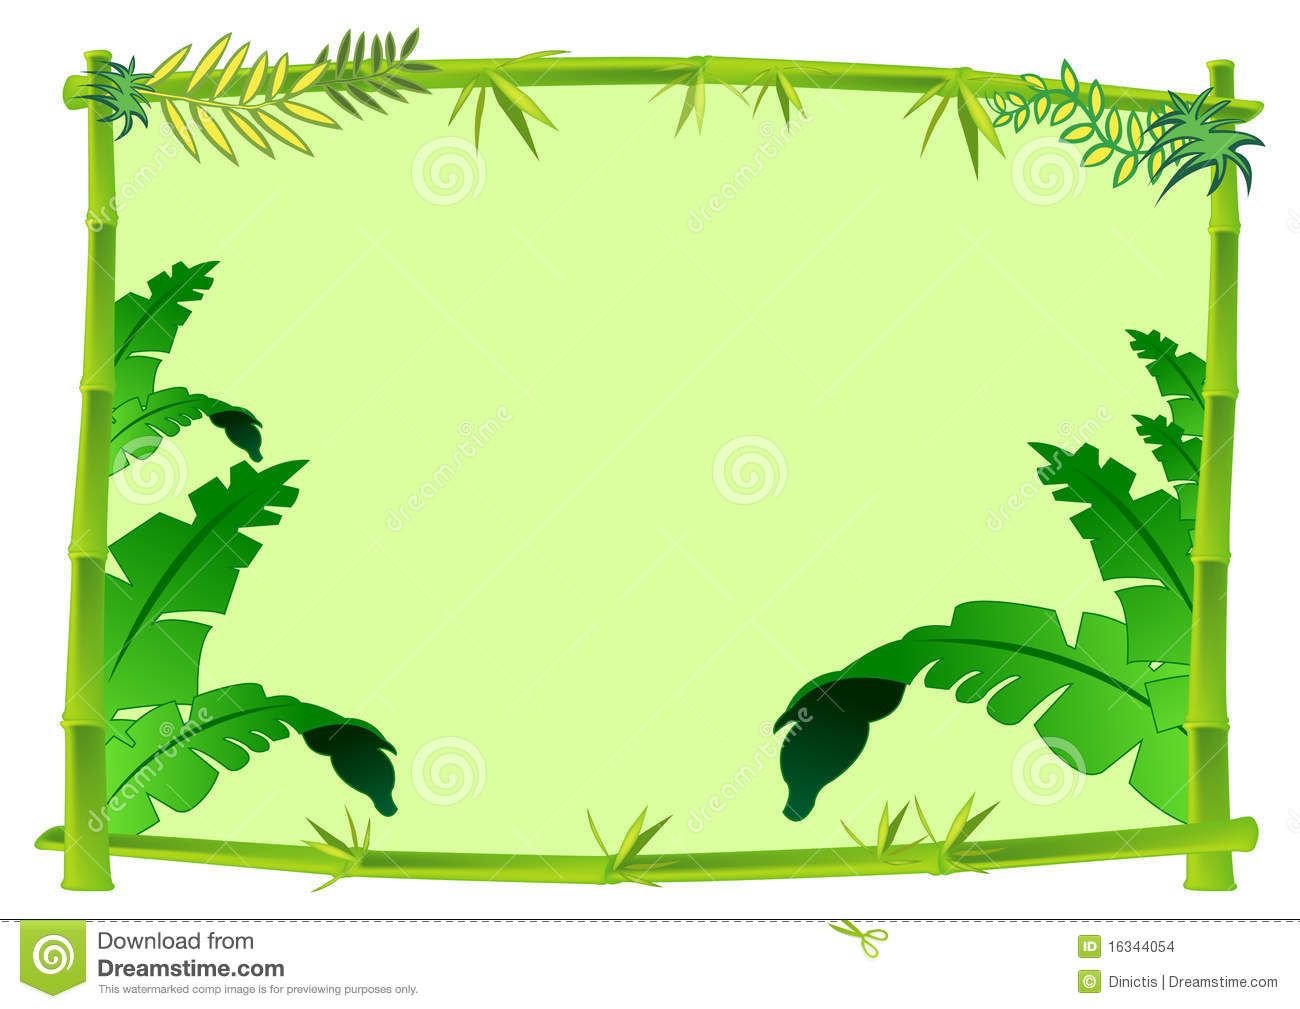 Jungle tree frame summer. Bamboo clipart signage